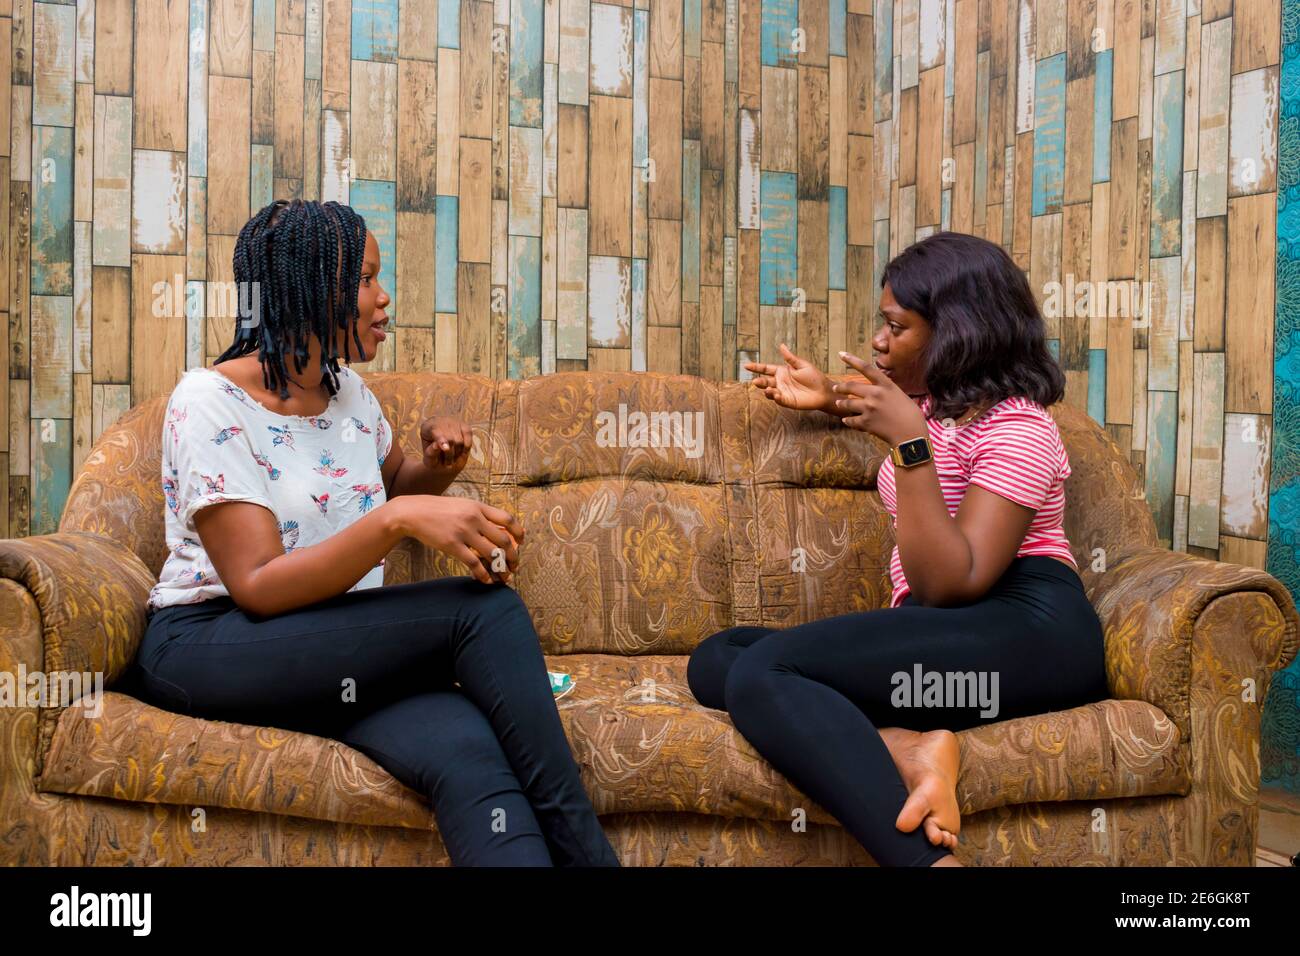 young black ladies sitting on a couch, discussing and making some jokes Stock Photo